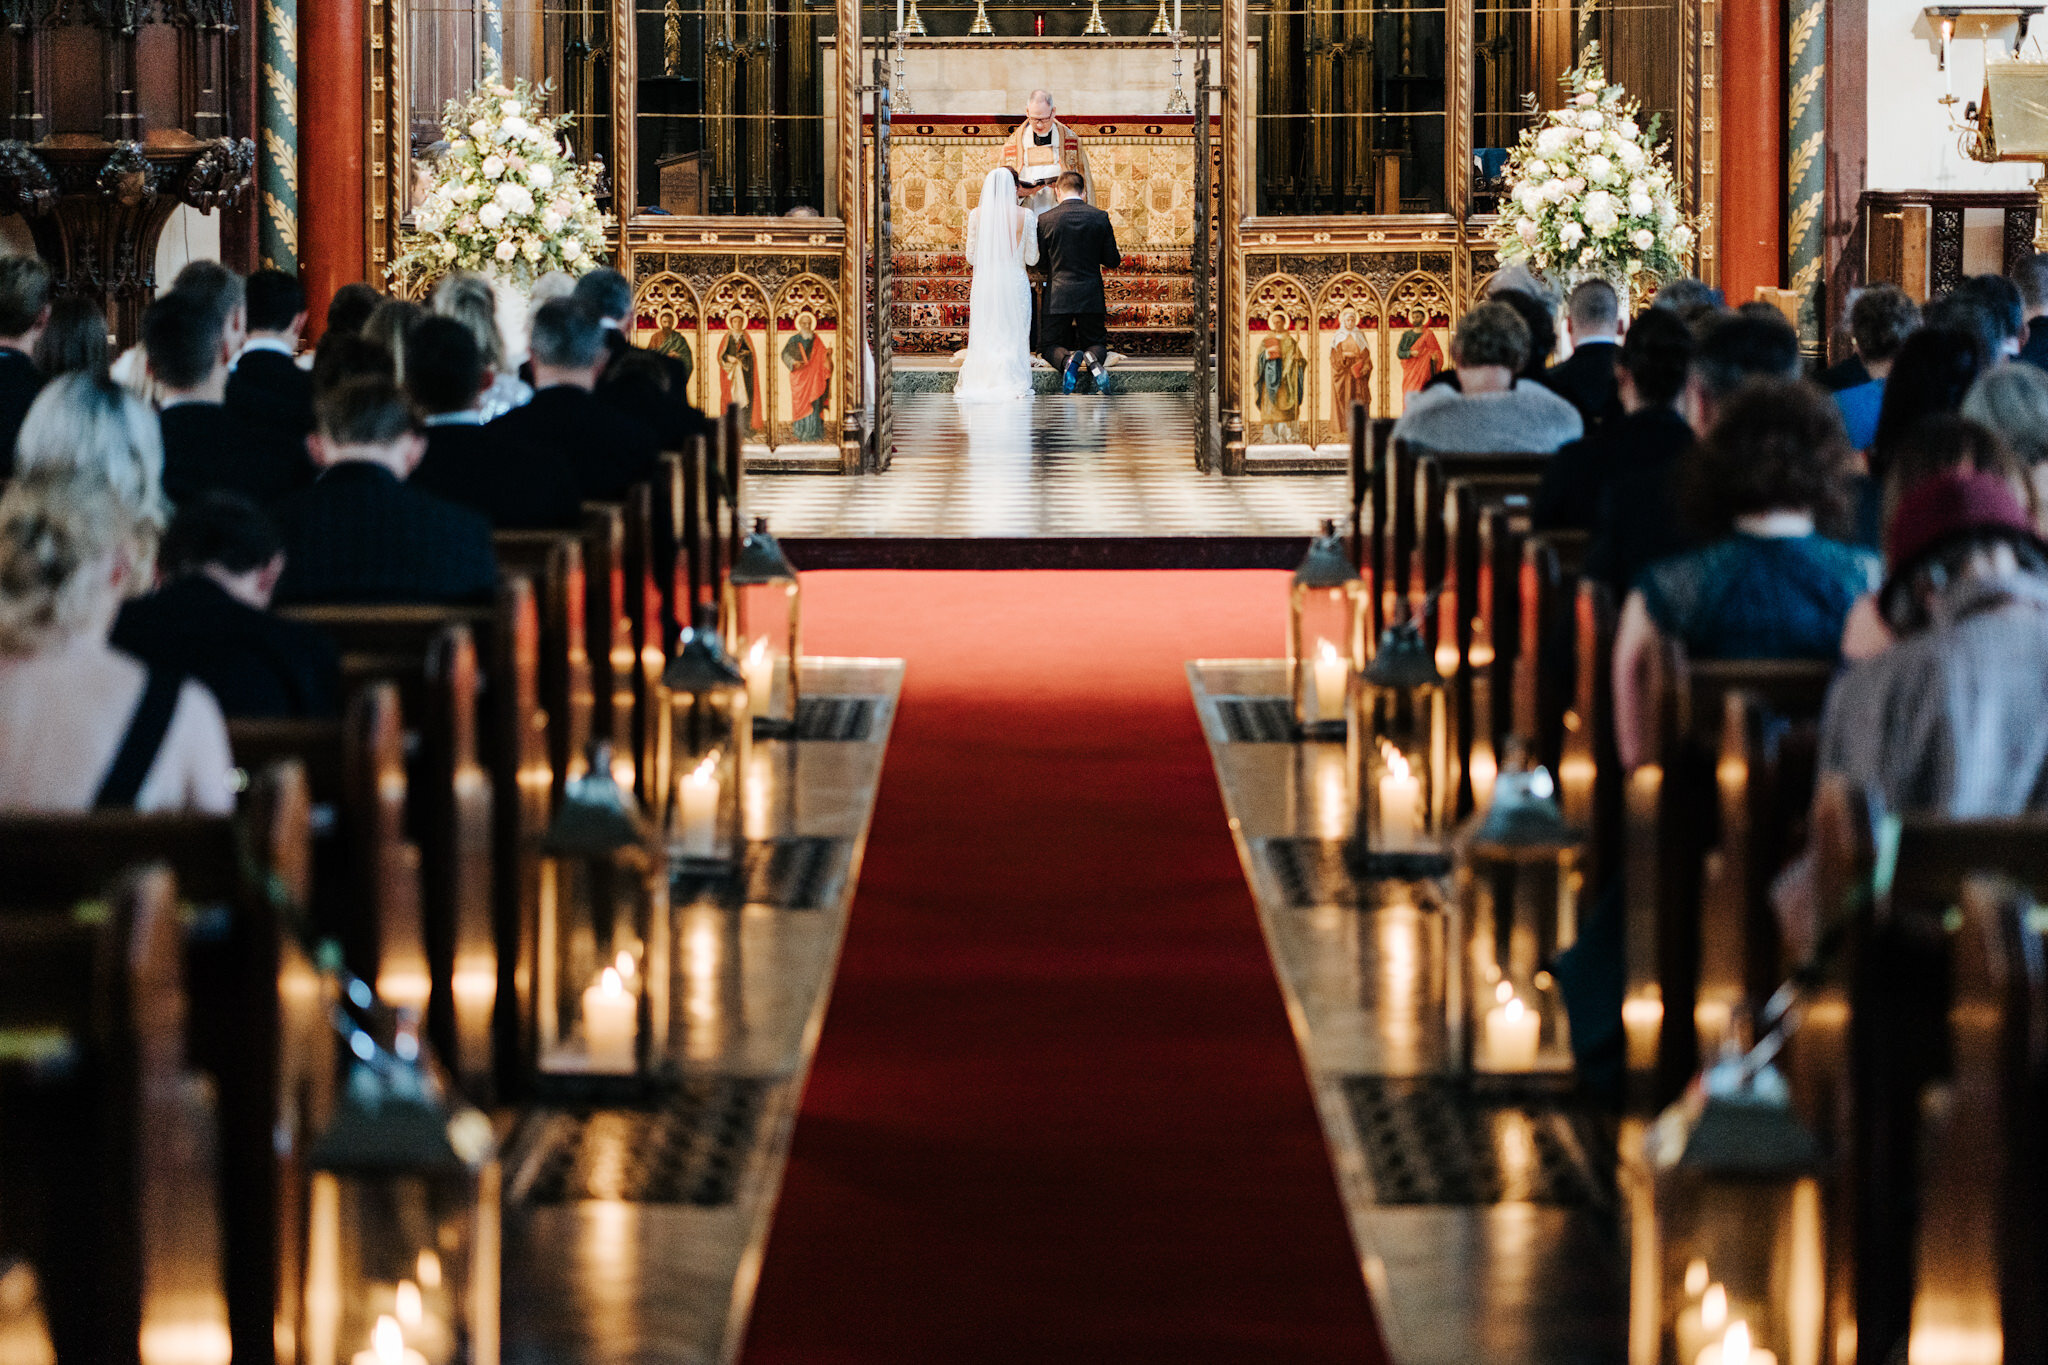 Wide photograph of the wedding ceremony at St Pauls Knightsbridge taken from the last pew